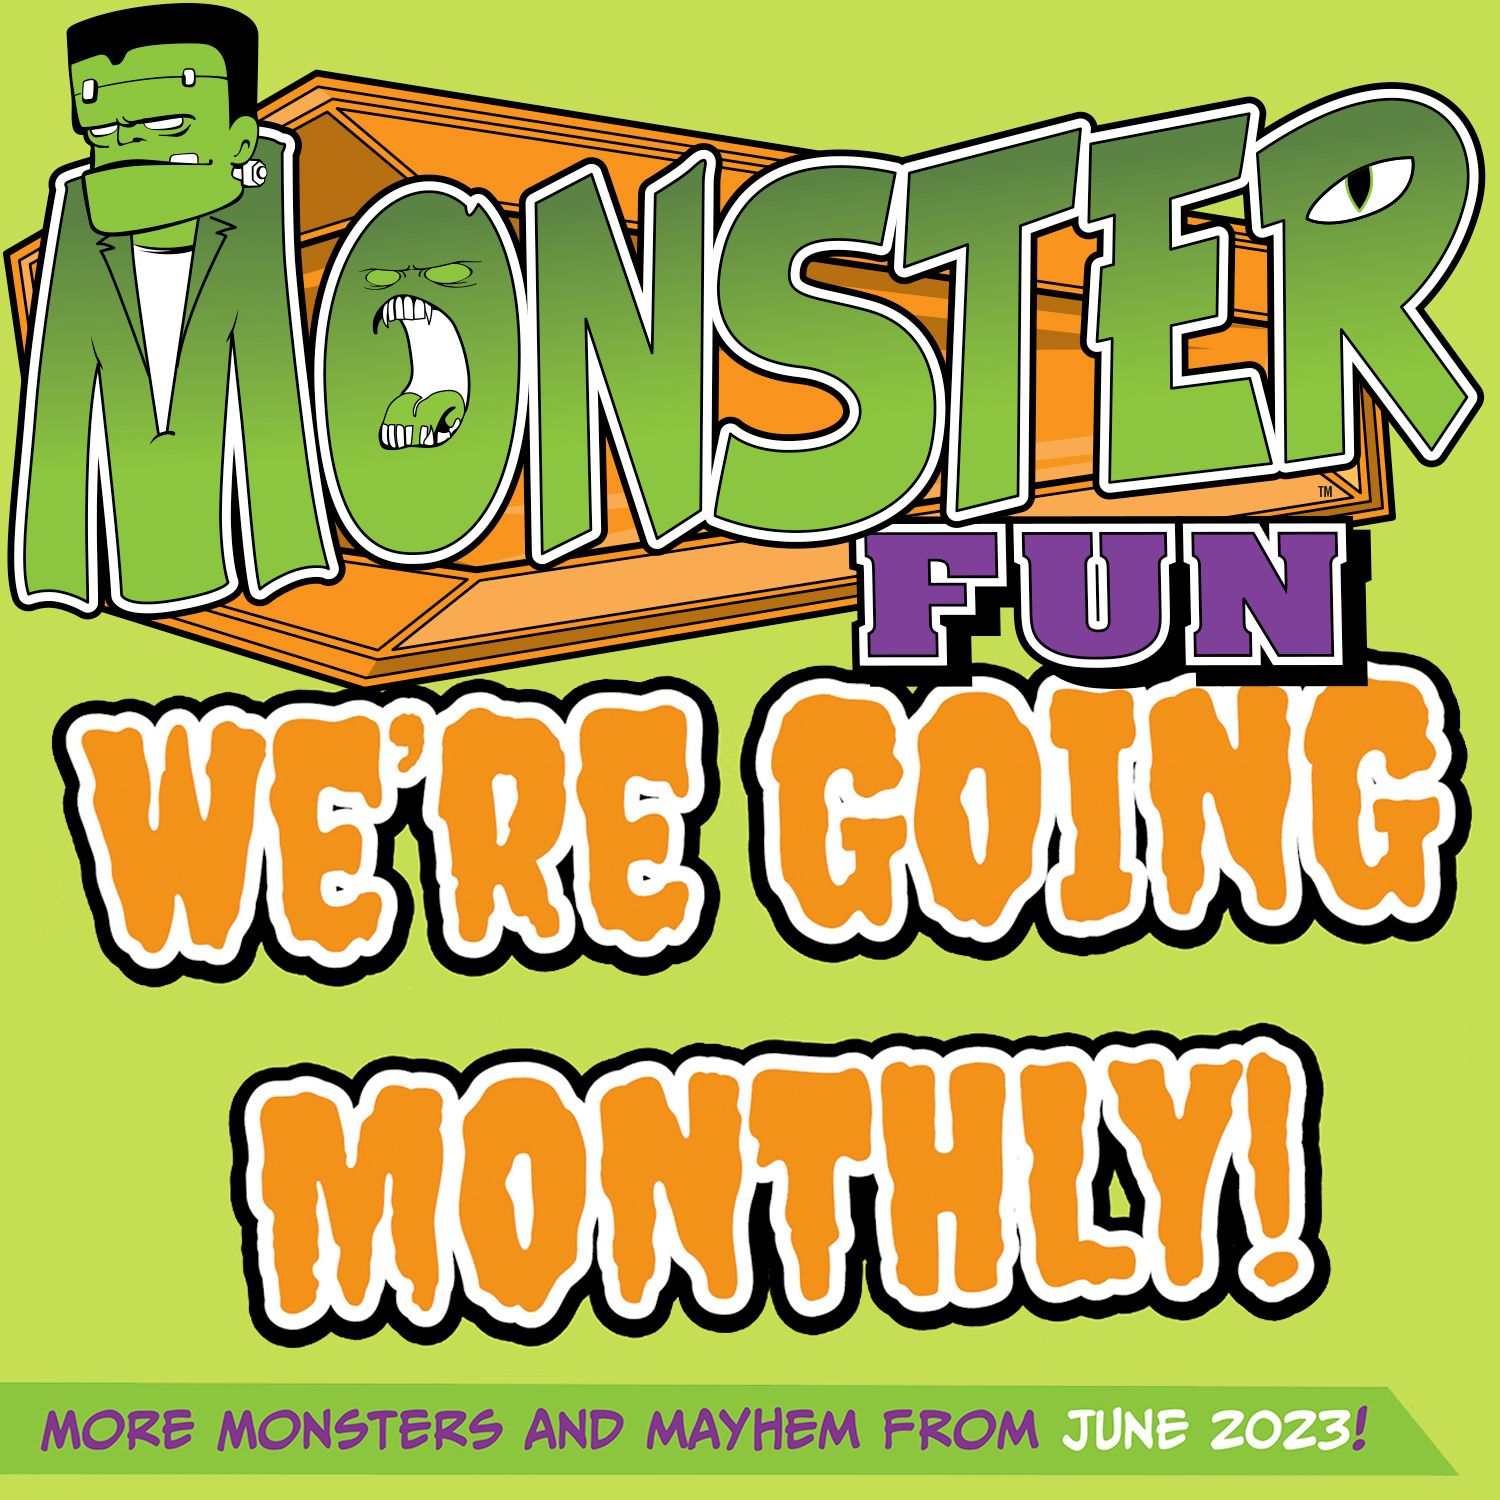 MORE stories! MORE monsters! MORE fun! MONSTER FUN goes monthly due to POPULAR DEMAND!